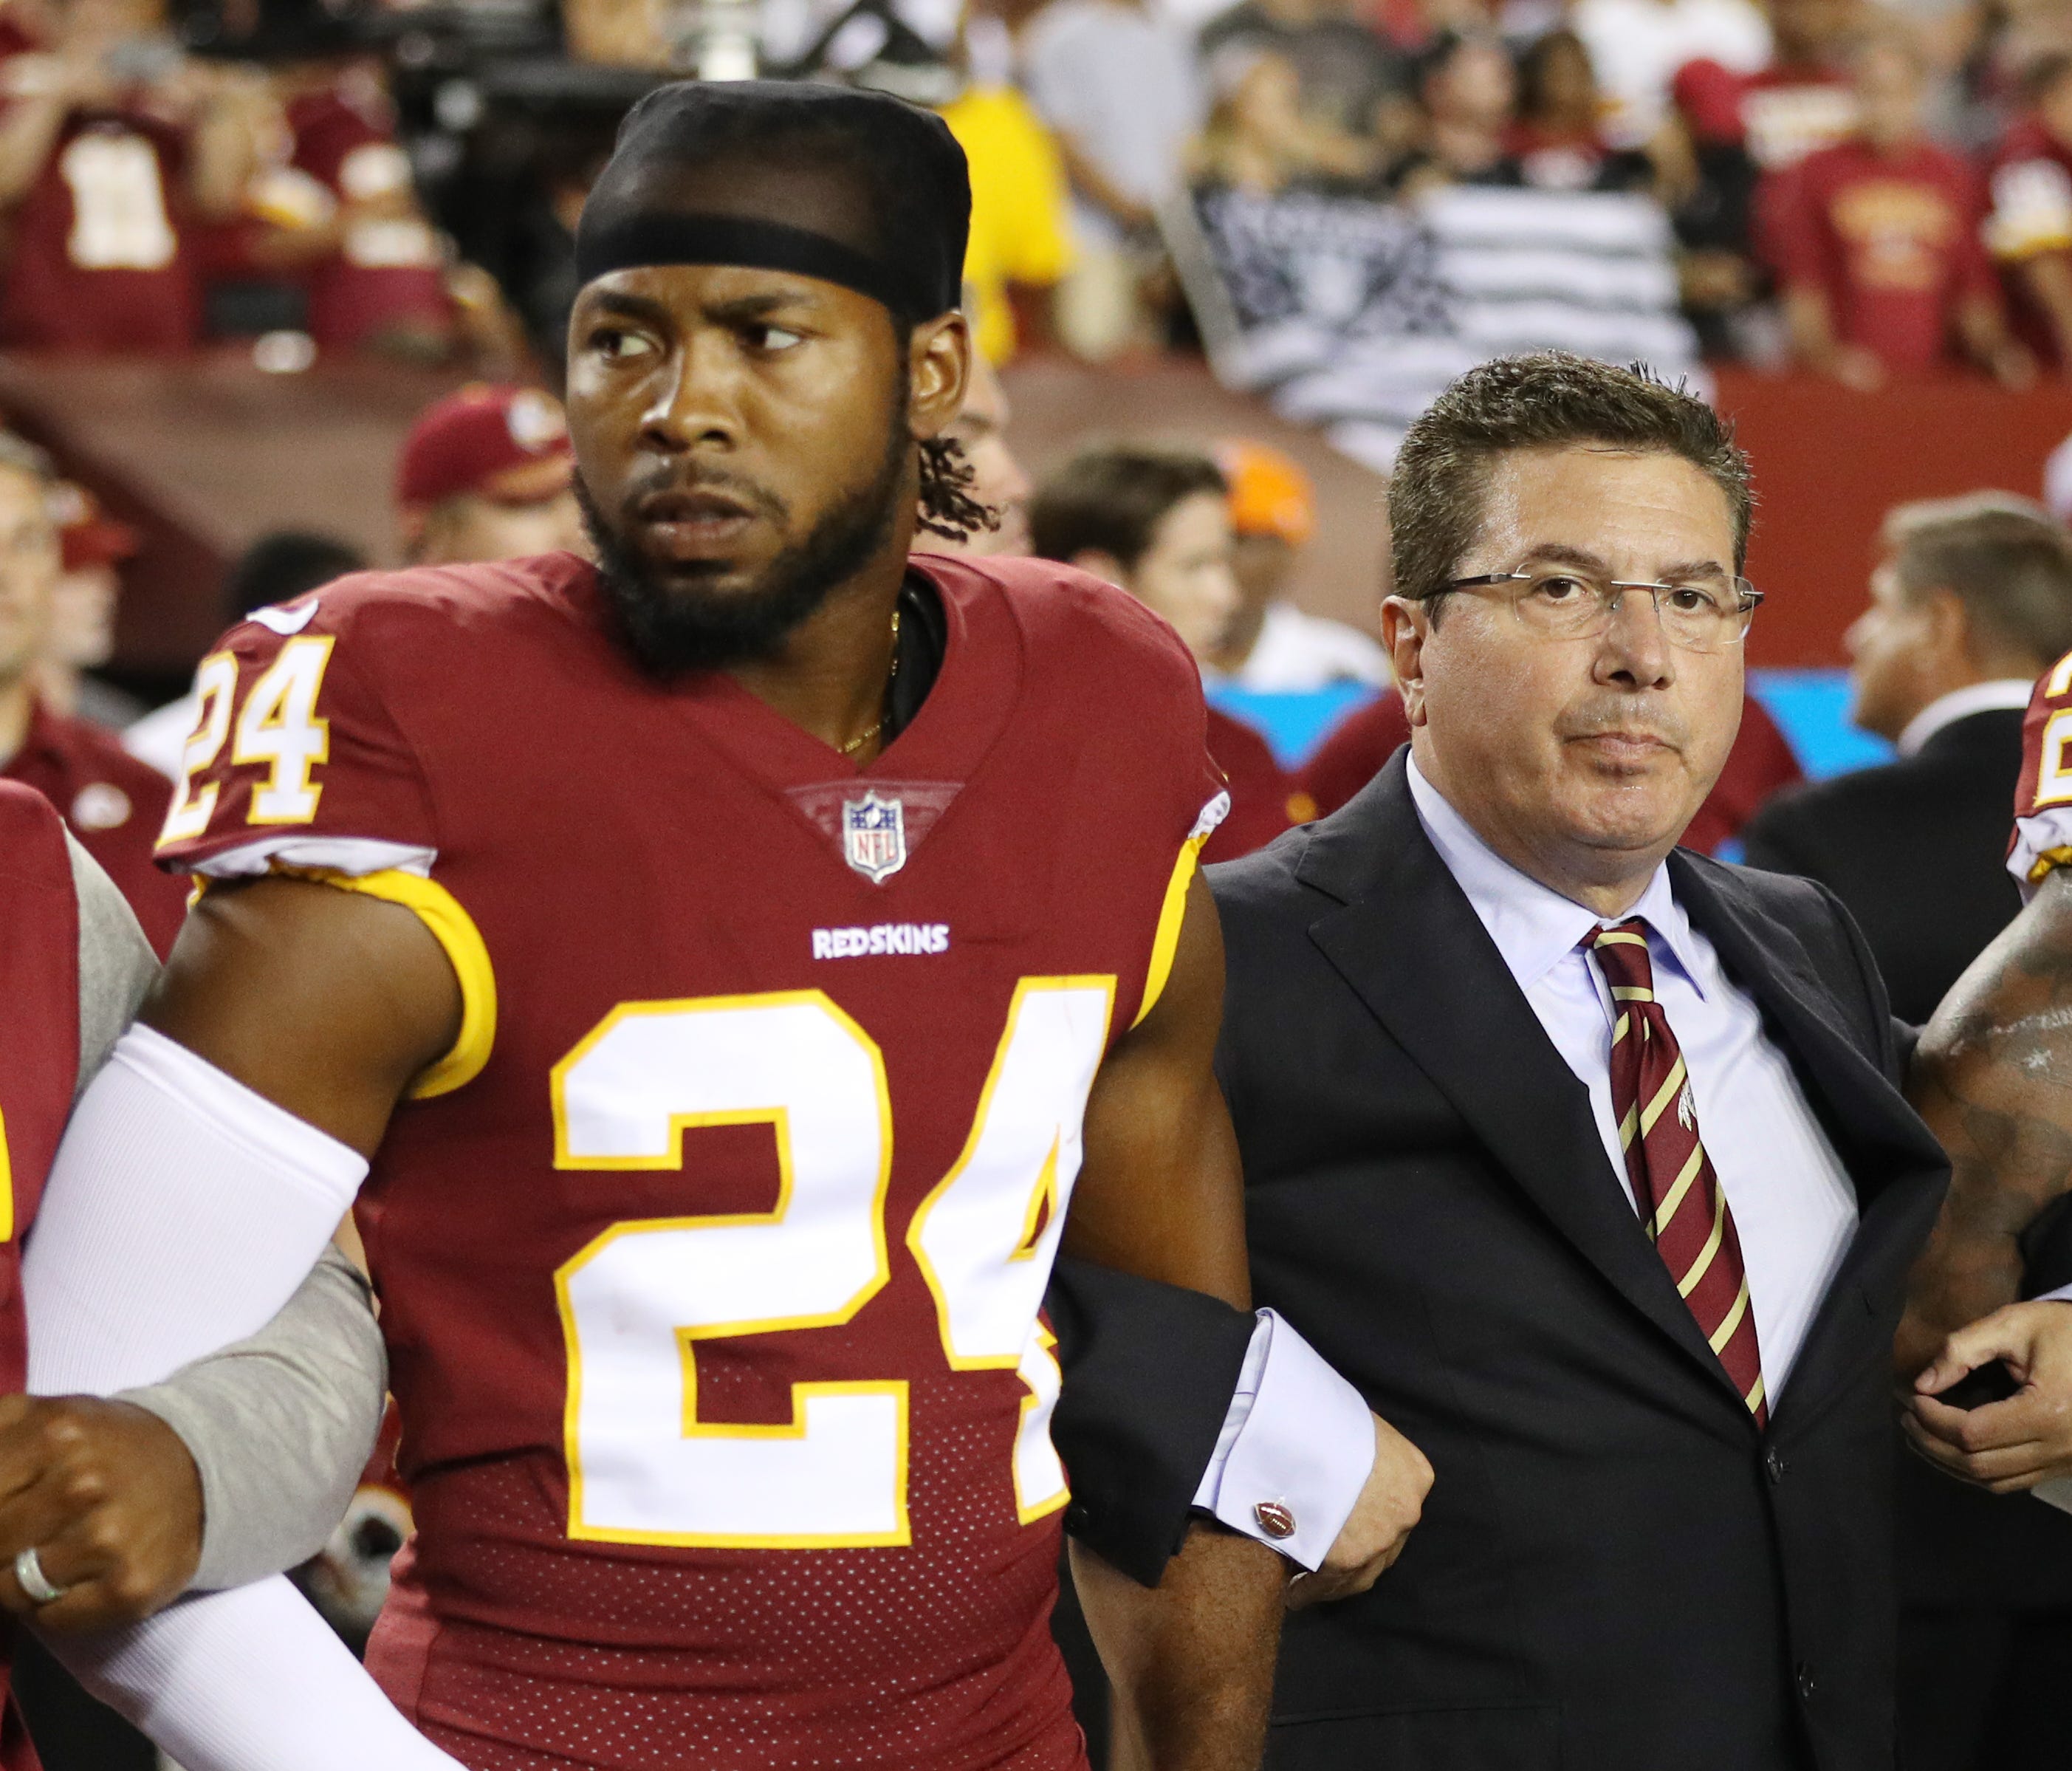 Washington Redskins owner Daniel Synder stands with cornerback Josh Norman during the the national anthem before the game against the Oakland Raiders at FedExField on September 24, 2017 in Landover, Maryland.